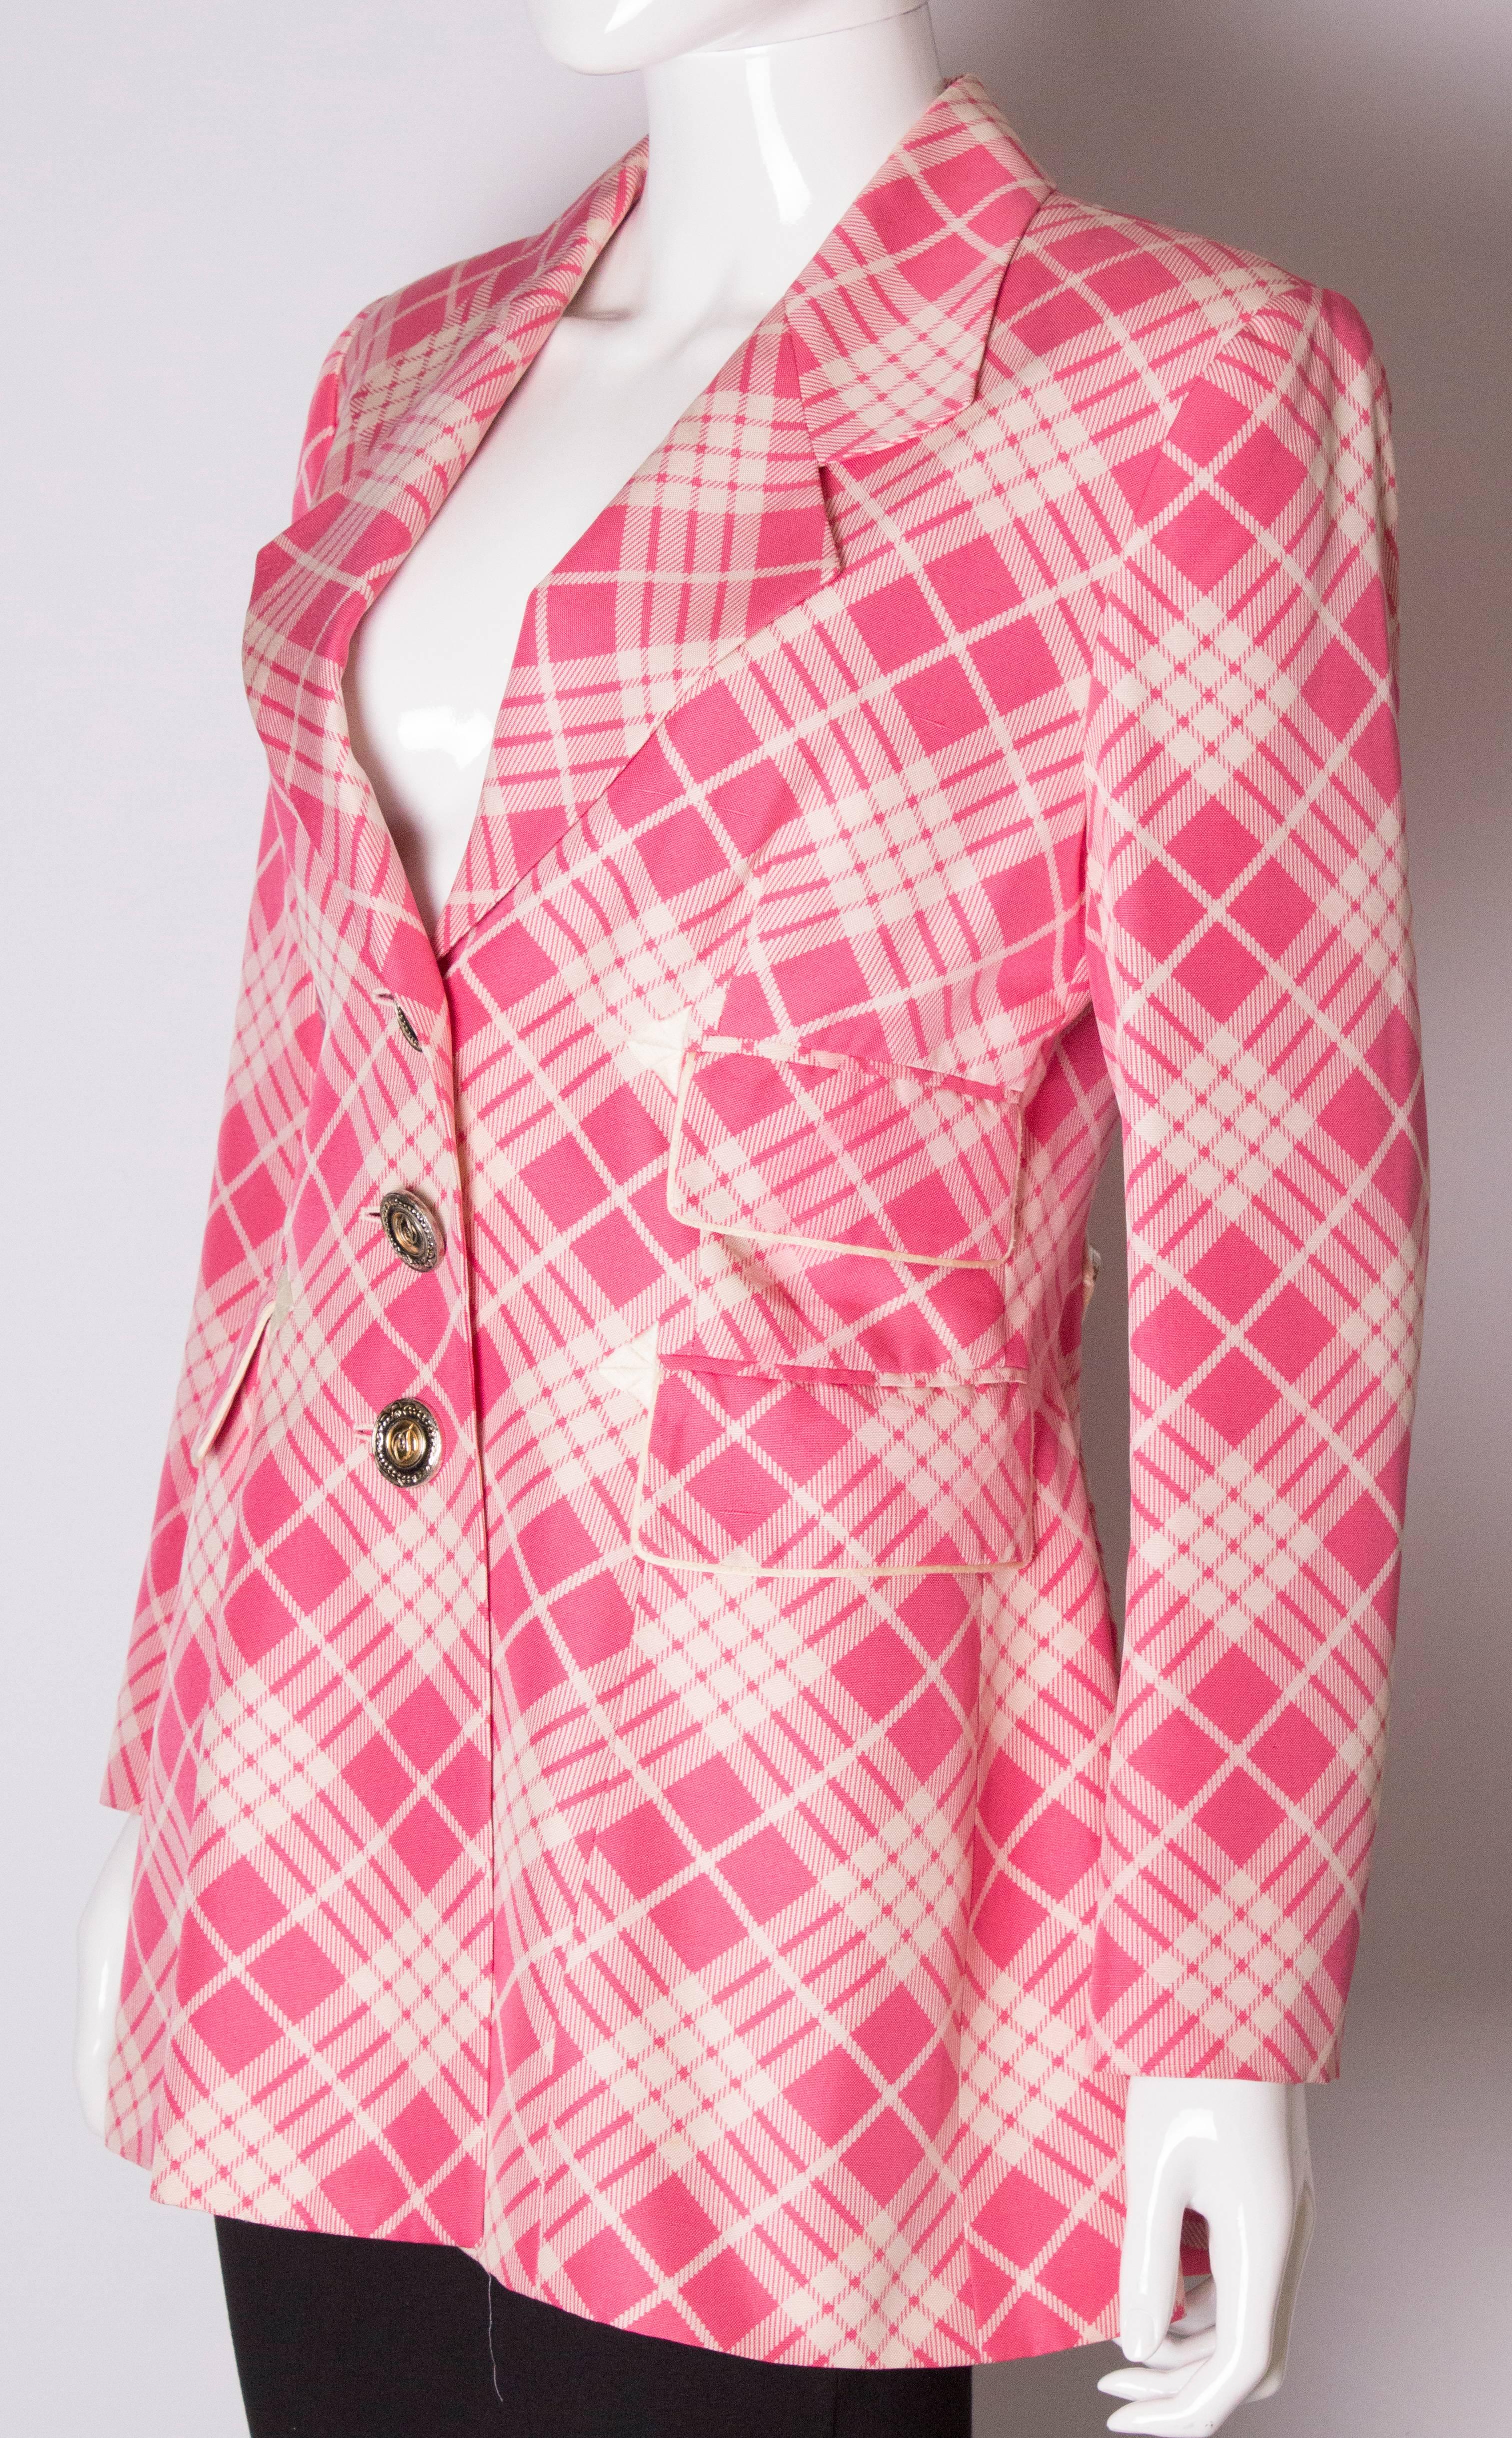 A great jacket for spring, by Christian Dior Boutique Paris, number 89815.The jacket has a v neckline, 3 button fastening ,2 flap pockets on the right handside and one on the left hand side. The jacket has a peplum like lower area with a 1/ belt at